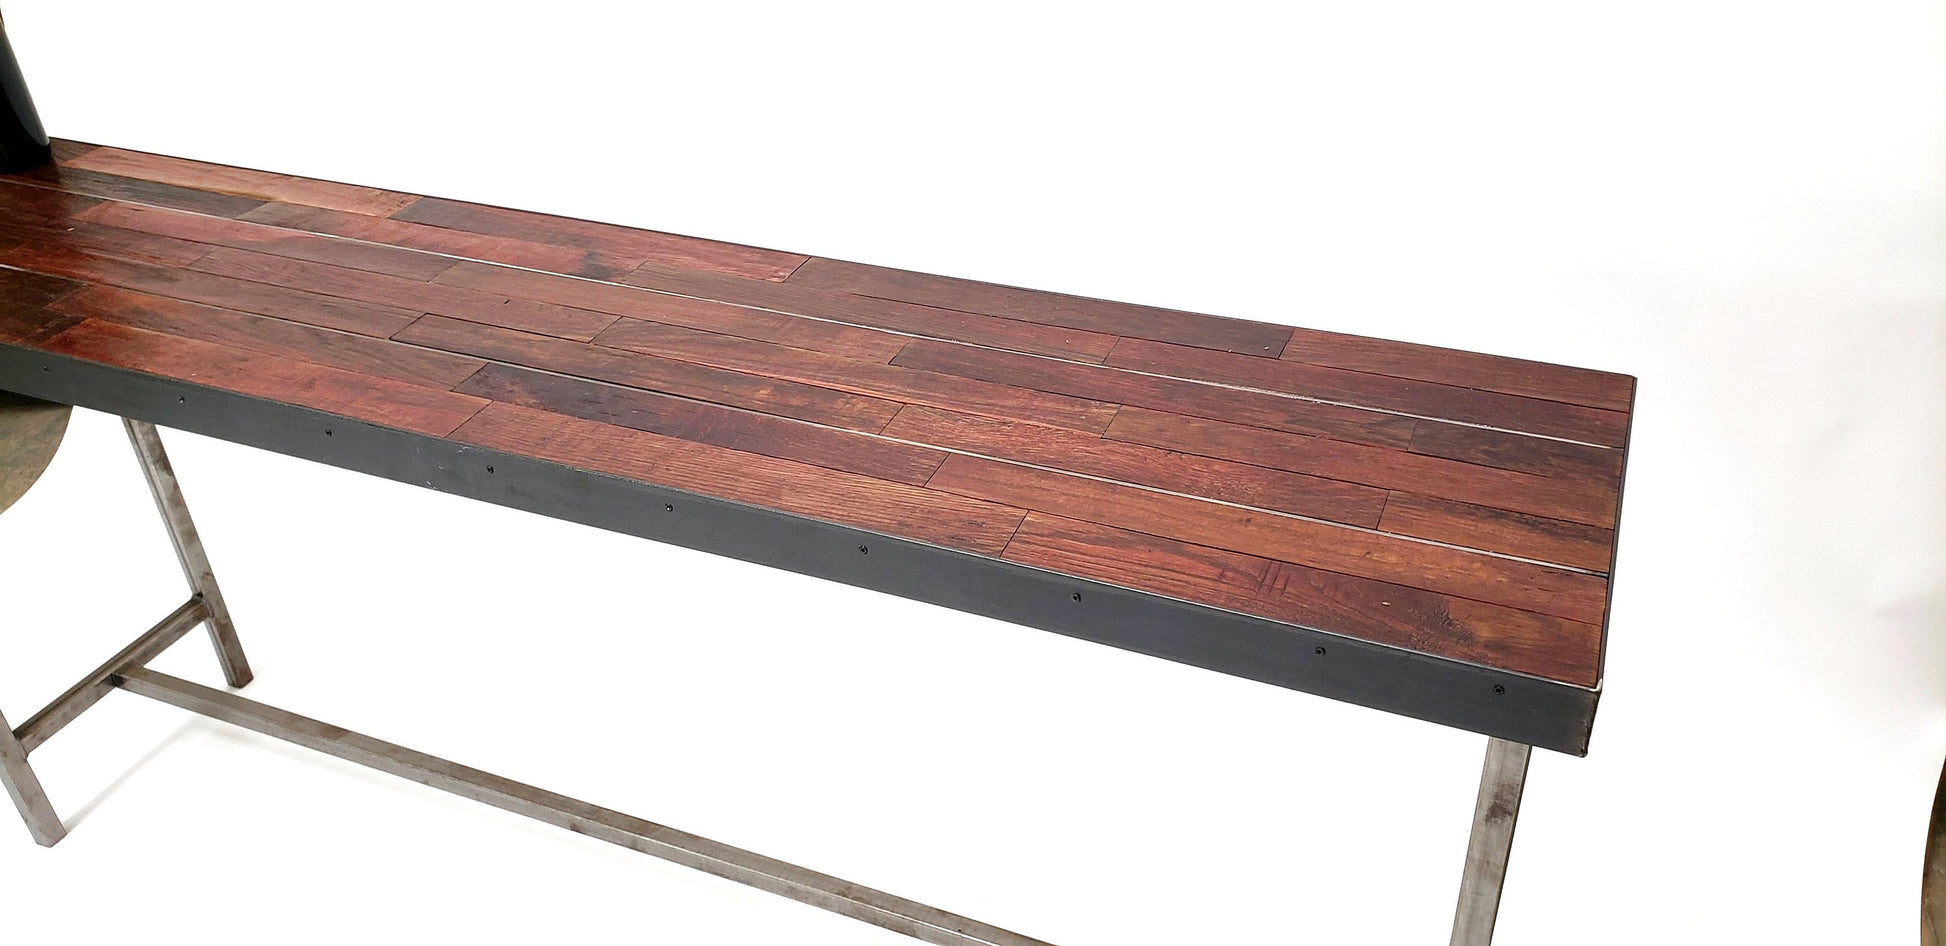 SALE Wine Barrel Entry / Sofa / Console Table - Katan - Made from retired California wine barrels. 100% Recycled!